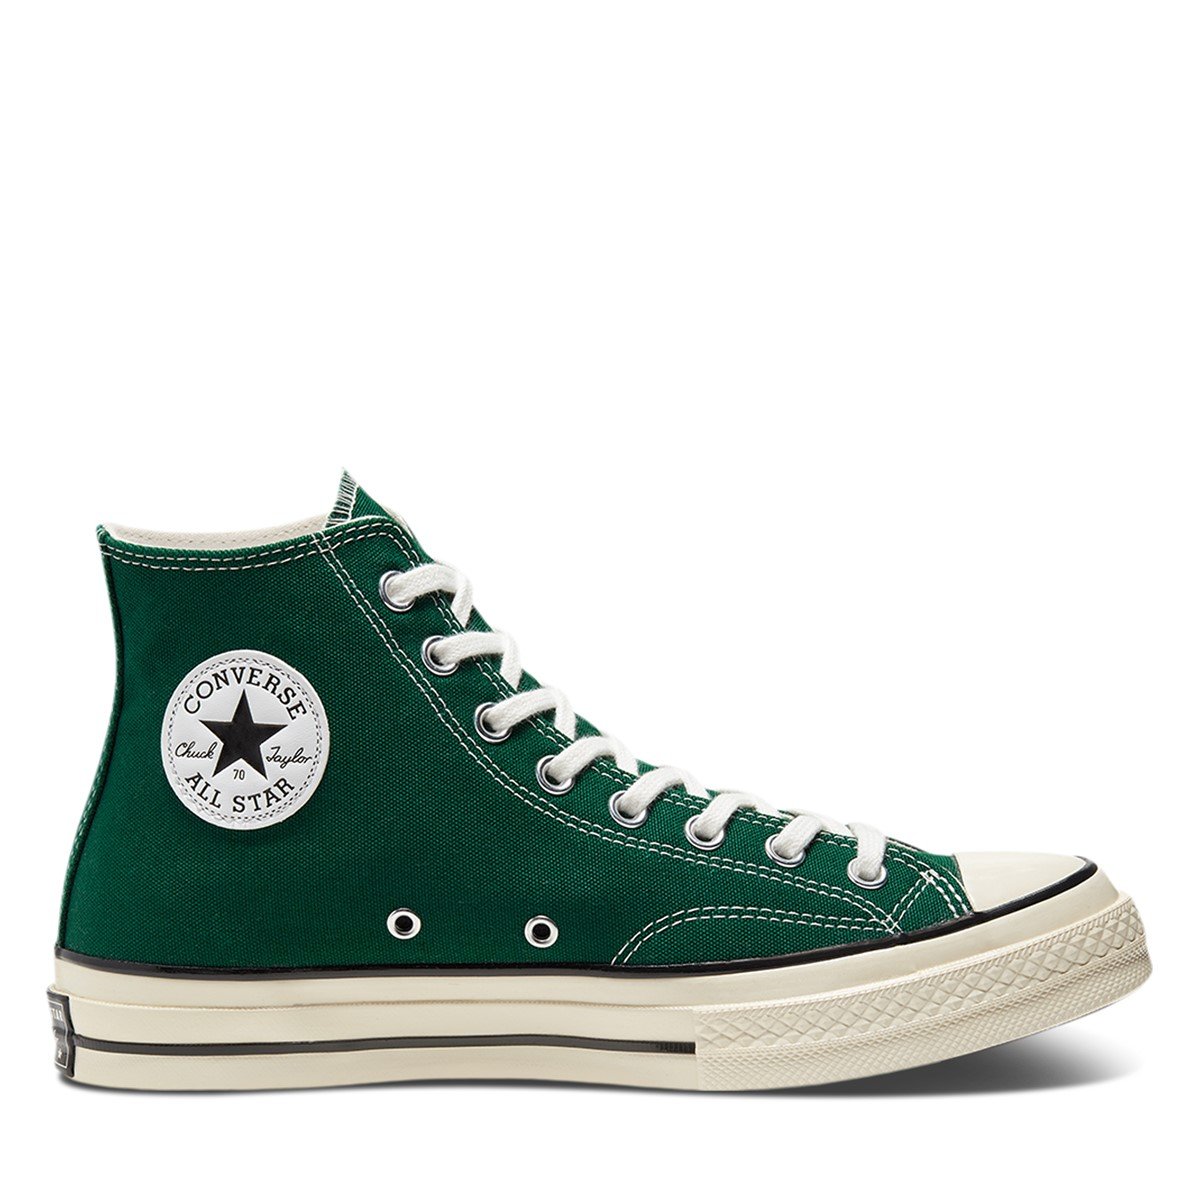 Chuck 70 Hi Sneakers in Forest Green 